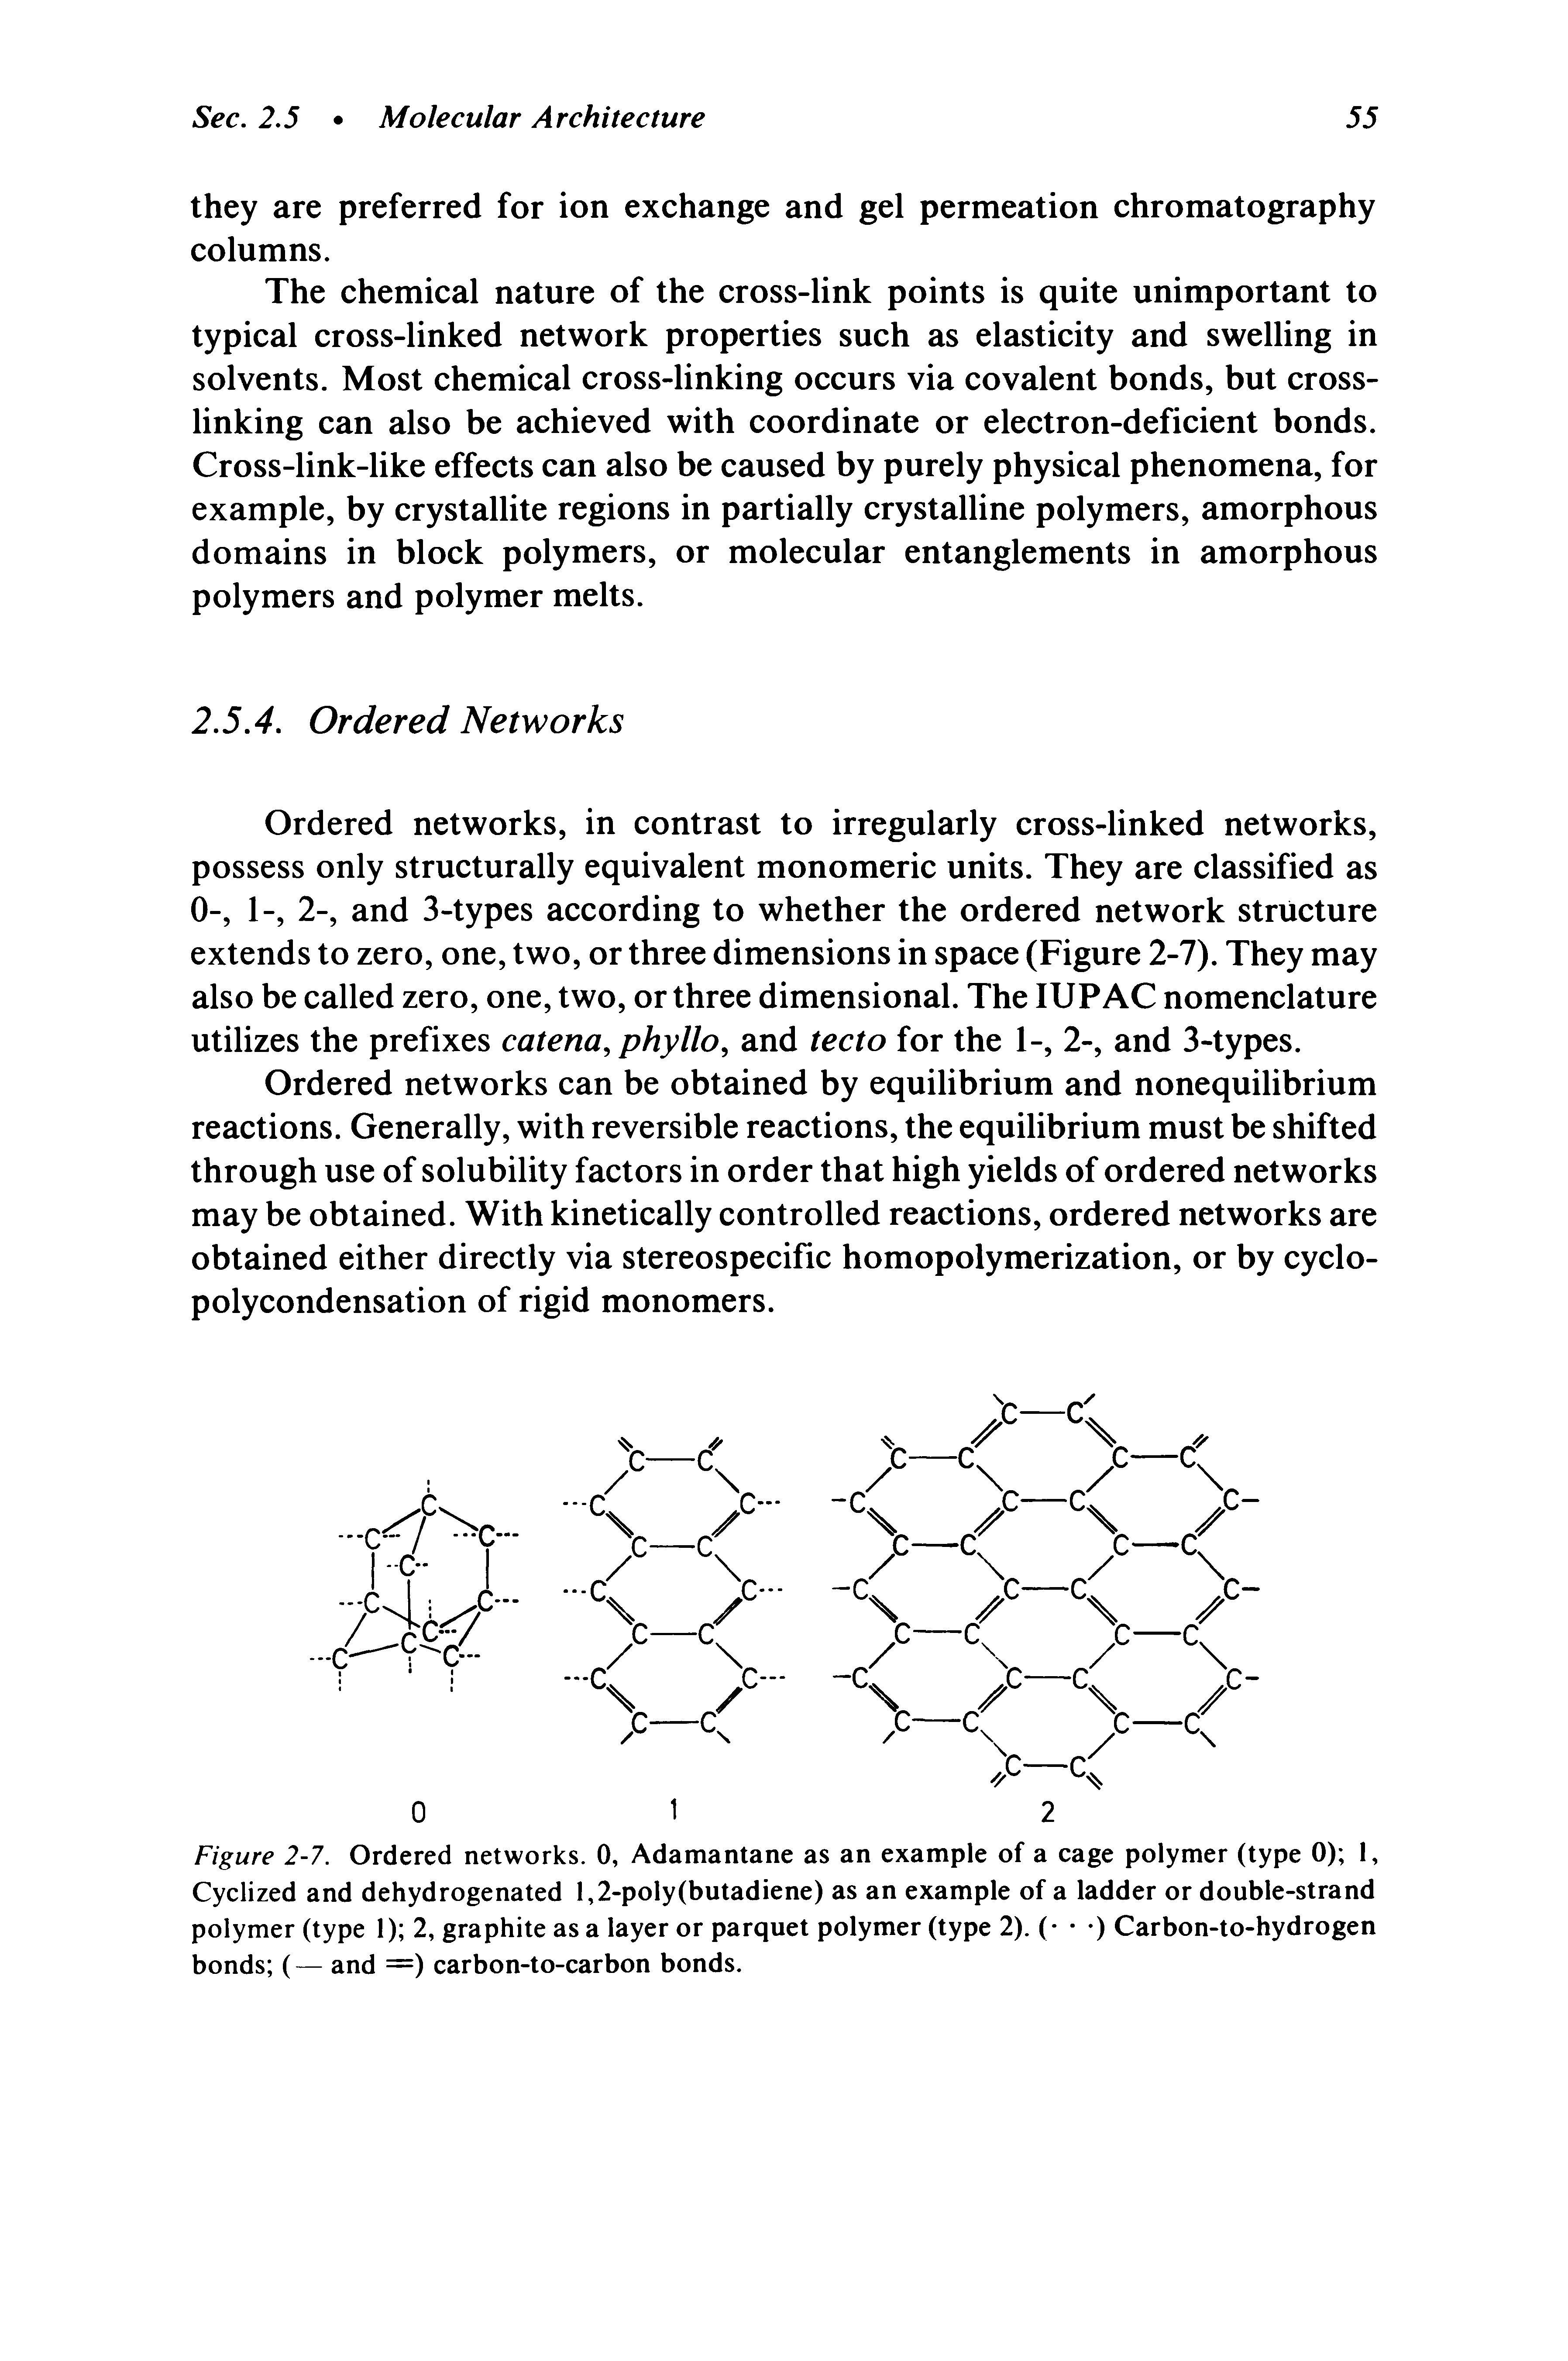 Figure 2-7. Ordered networks. 0, Adamantane as an example of a cage polymer (type 0) I, Cyclized and dehydrogenated l,2-poly(butadiene) as an example of a ladder or double-strand polymer (type 1) 2, graphite as a layer or parquet polymer (type 2). ( ) Carbon-to-hydrogen bonds (— and =) carbon-to-carbon bonds.